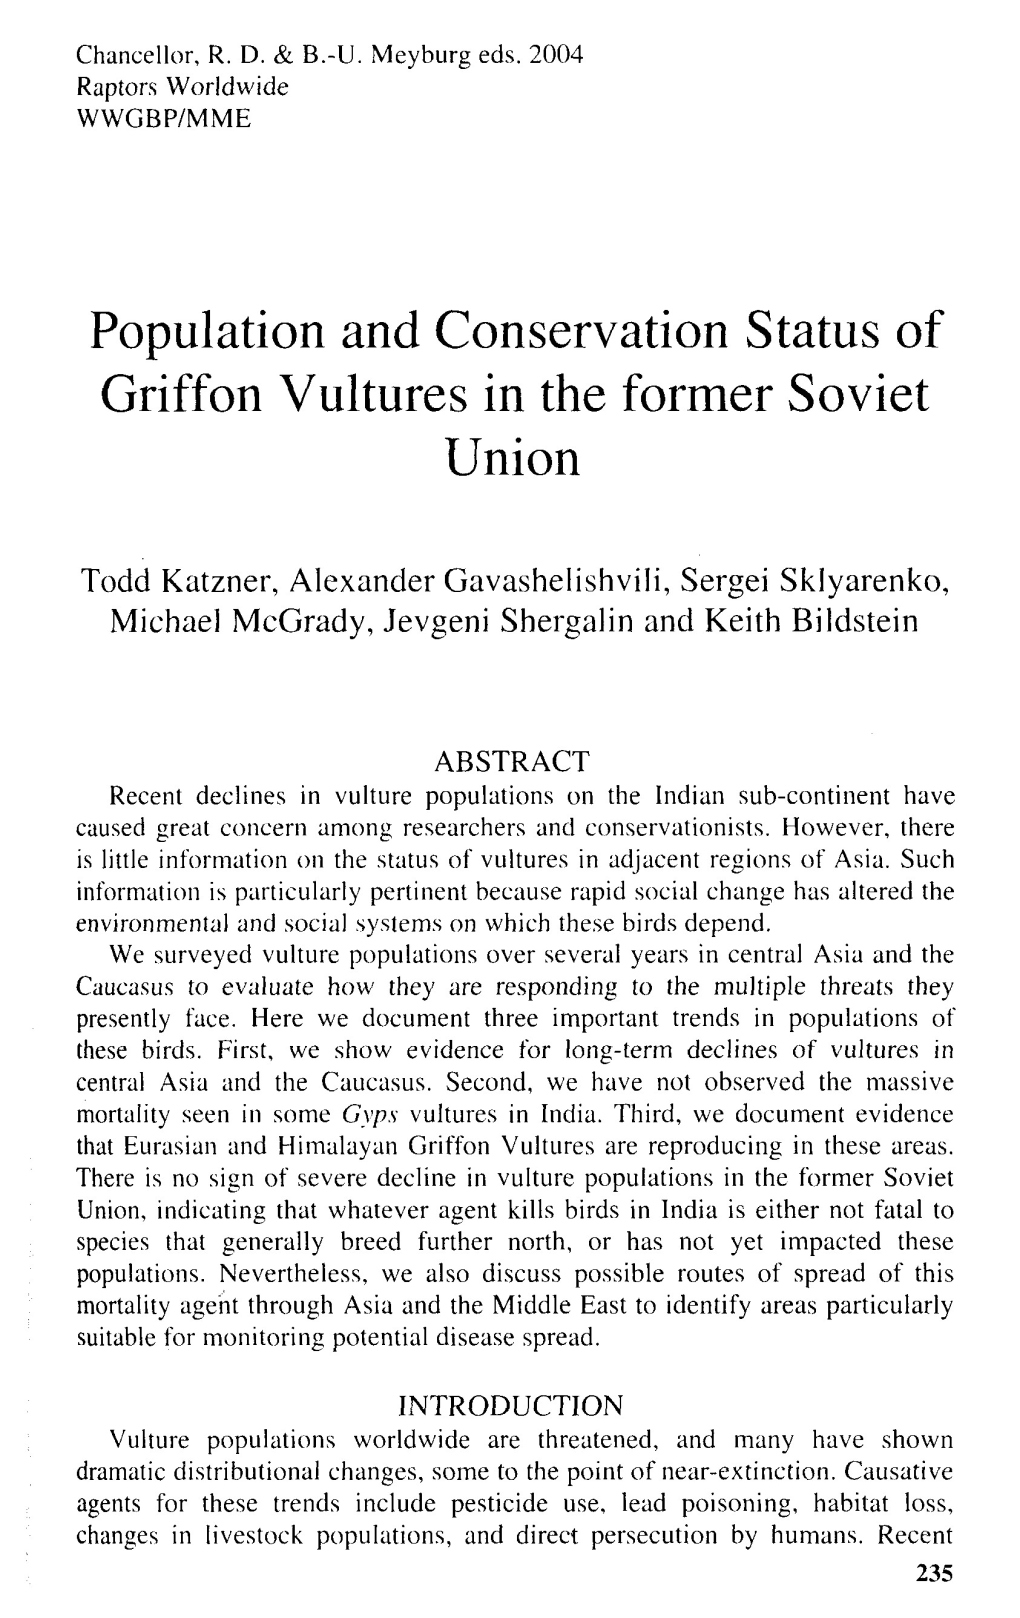 Population and Conservation Status of Griffon Vultures in the Former Soviet Union